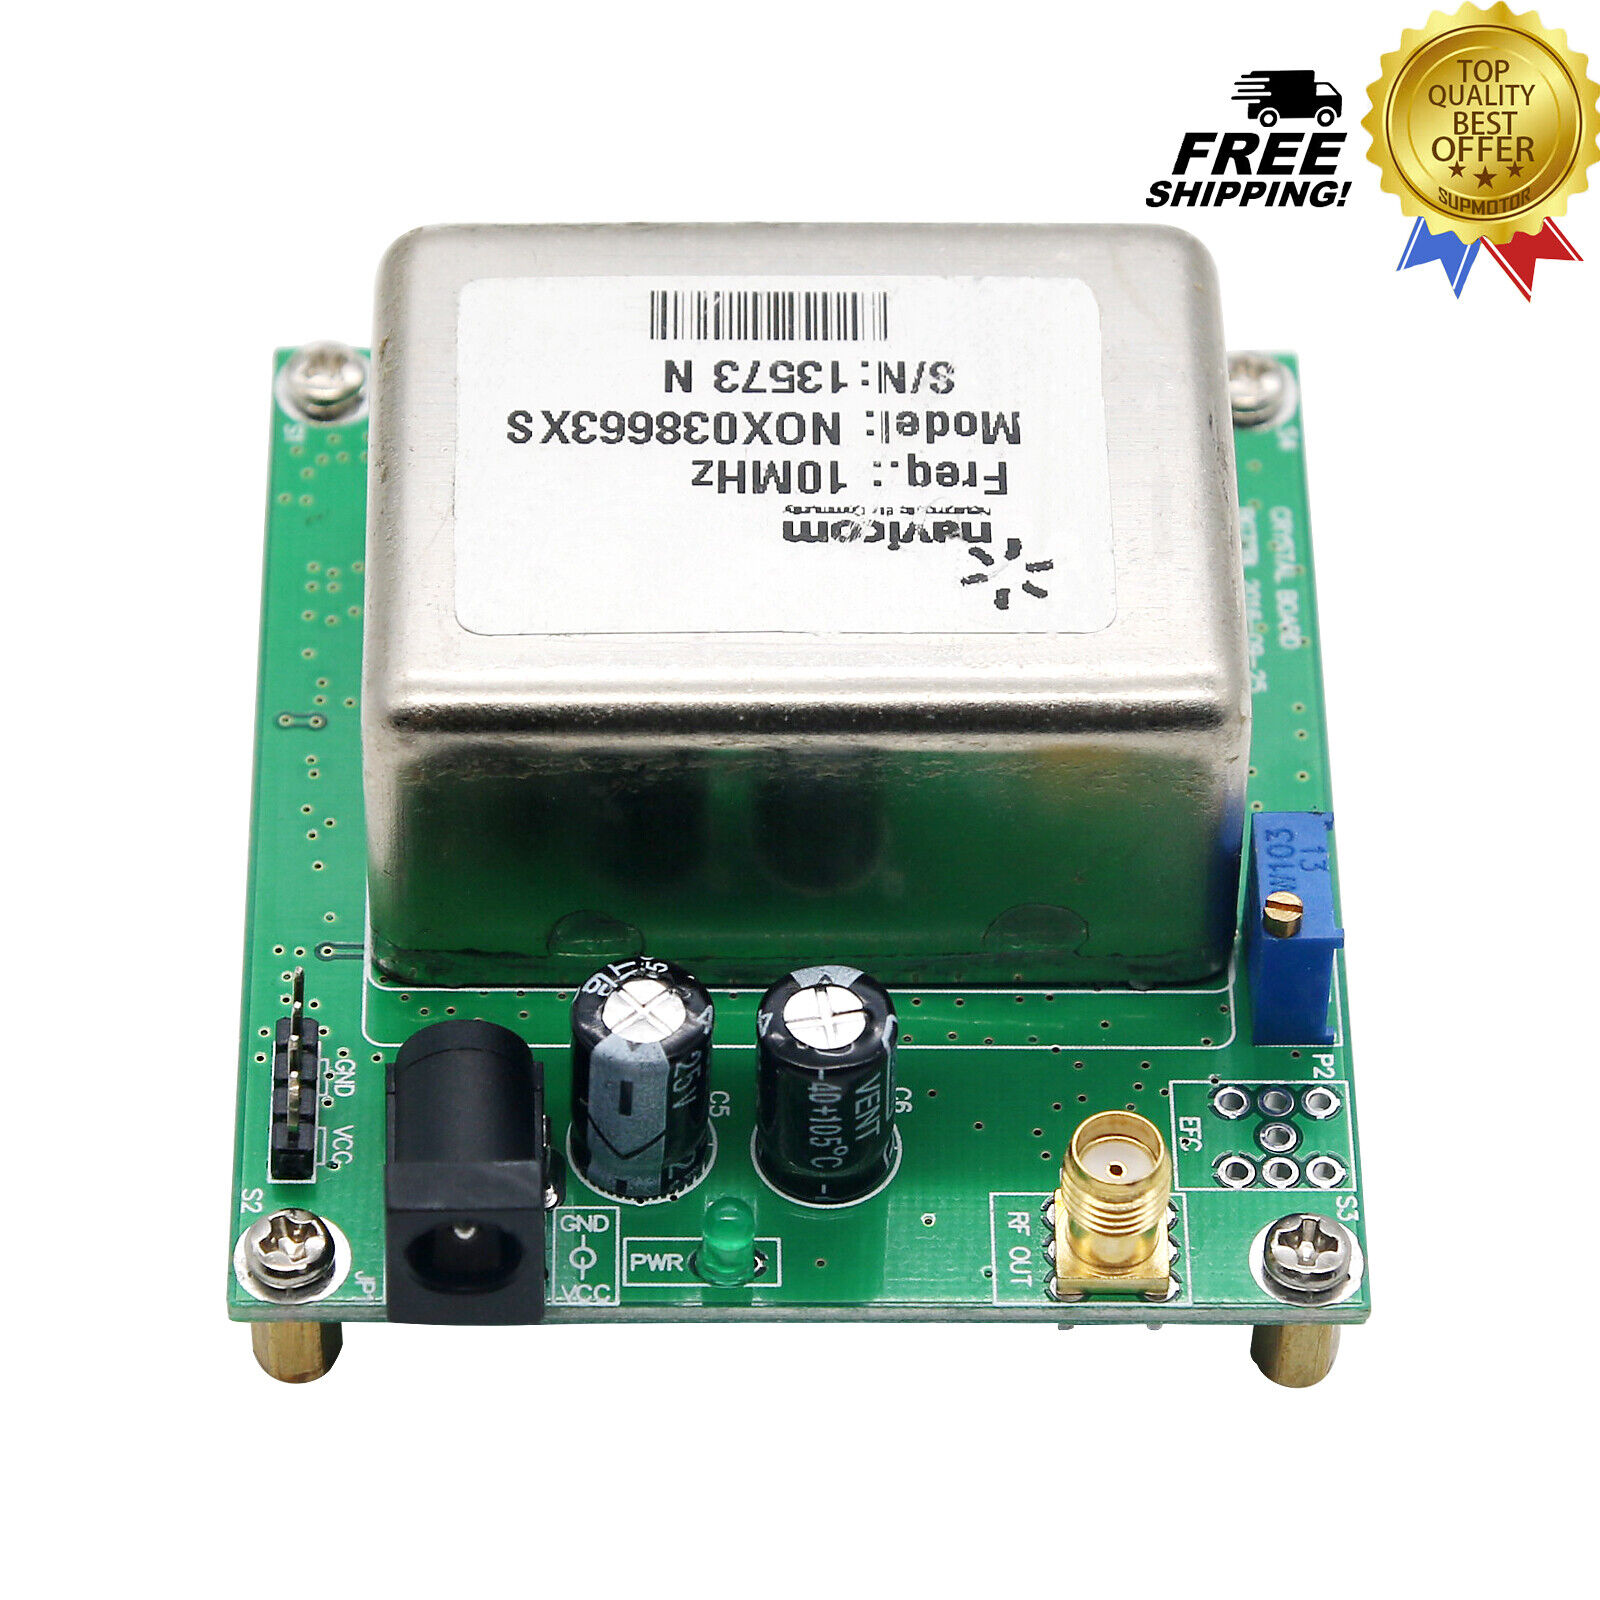 Brand New 10MHz OCXO Crystal Oscillator Frequency Reference with Board